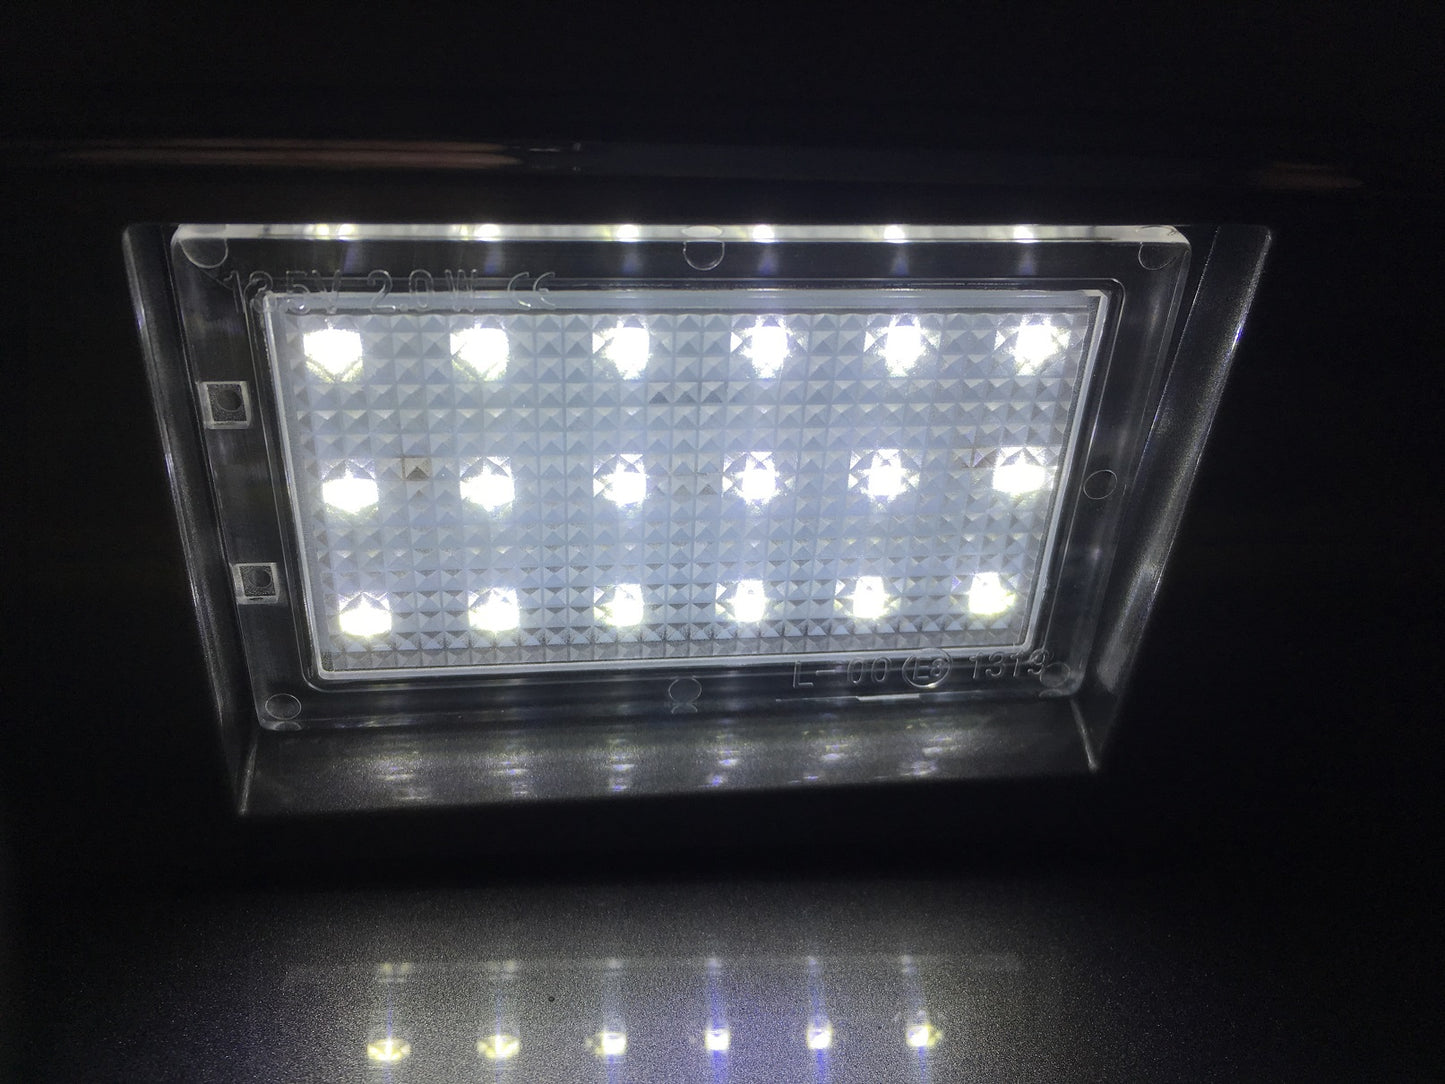 LED Rear Number plate light upgrade for Land Rover Discovery 3 & 4